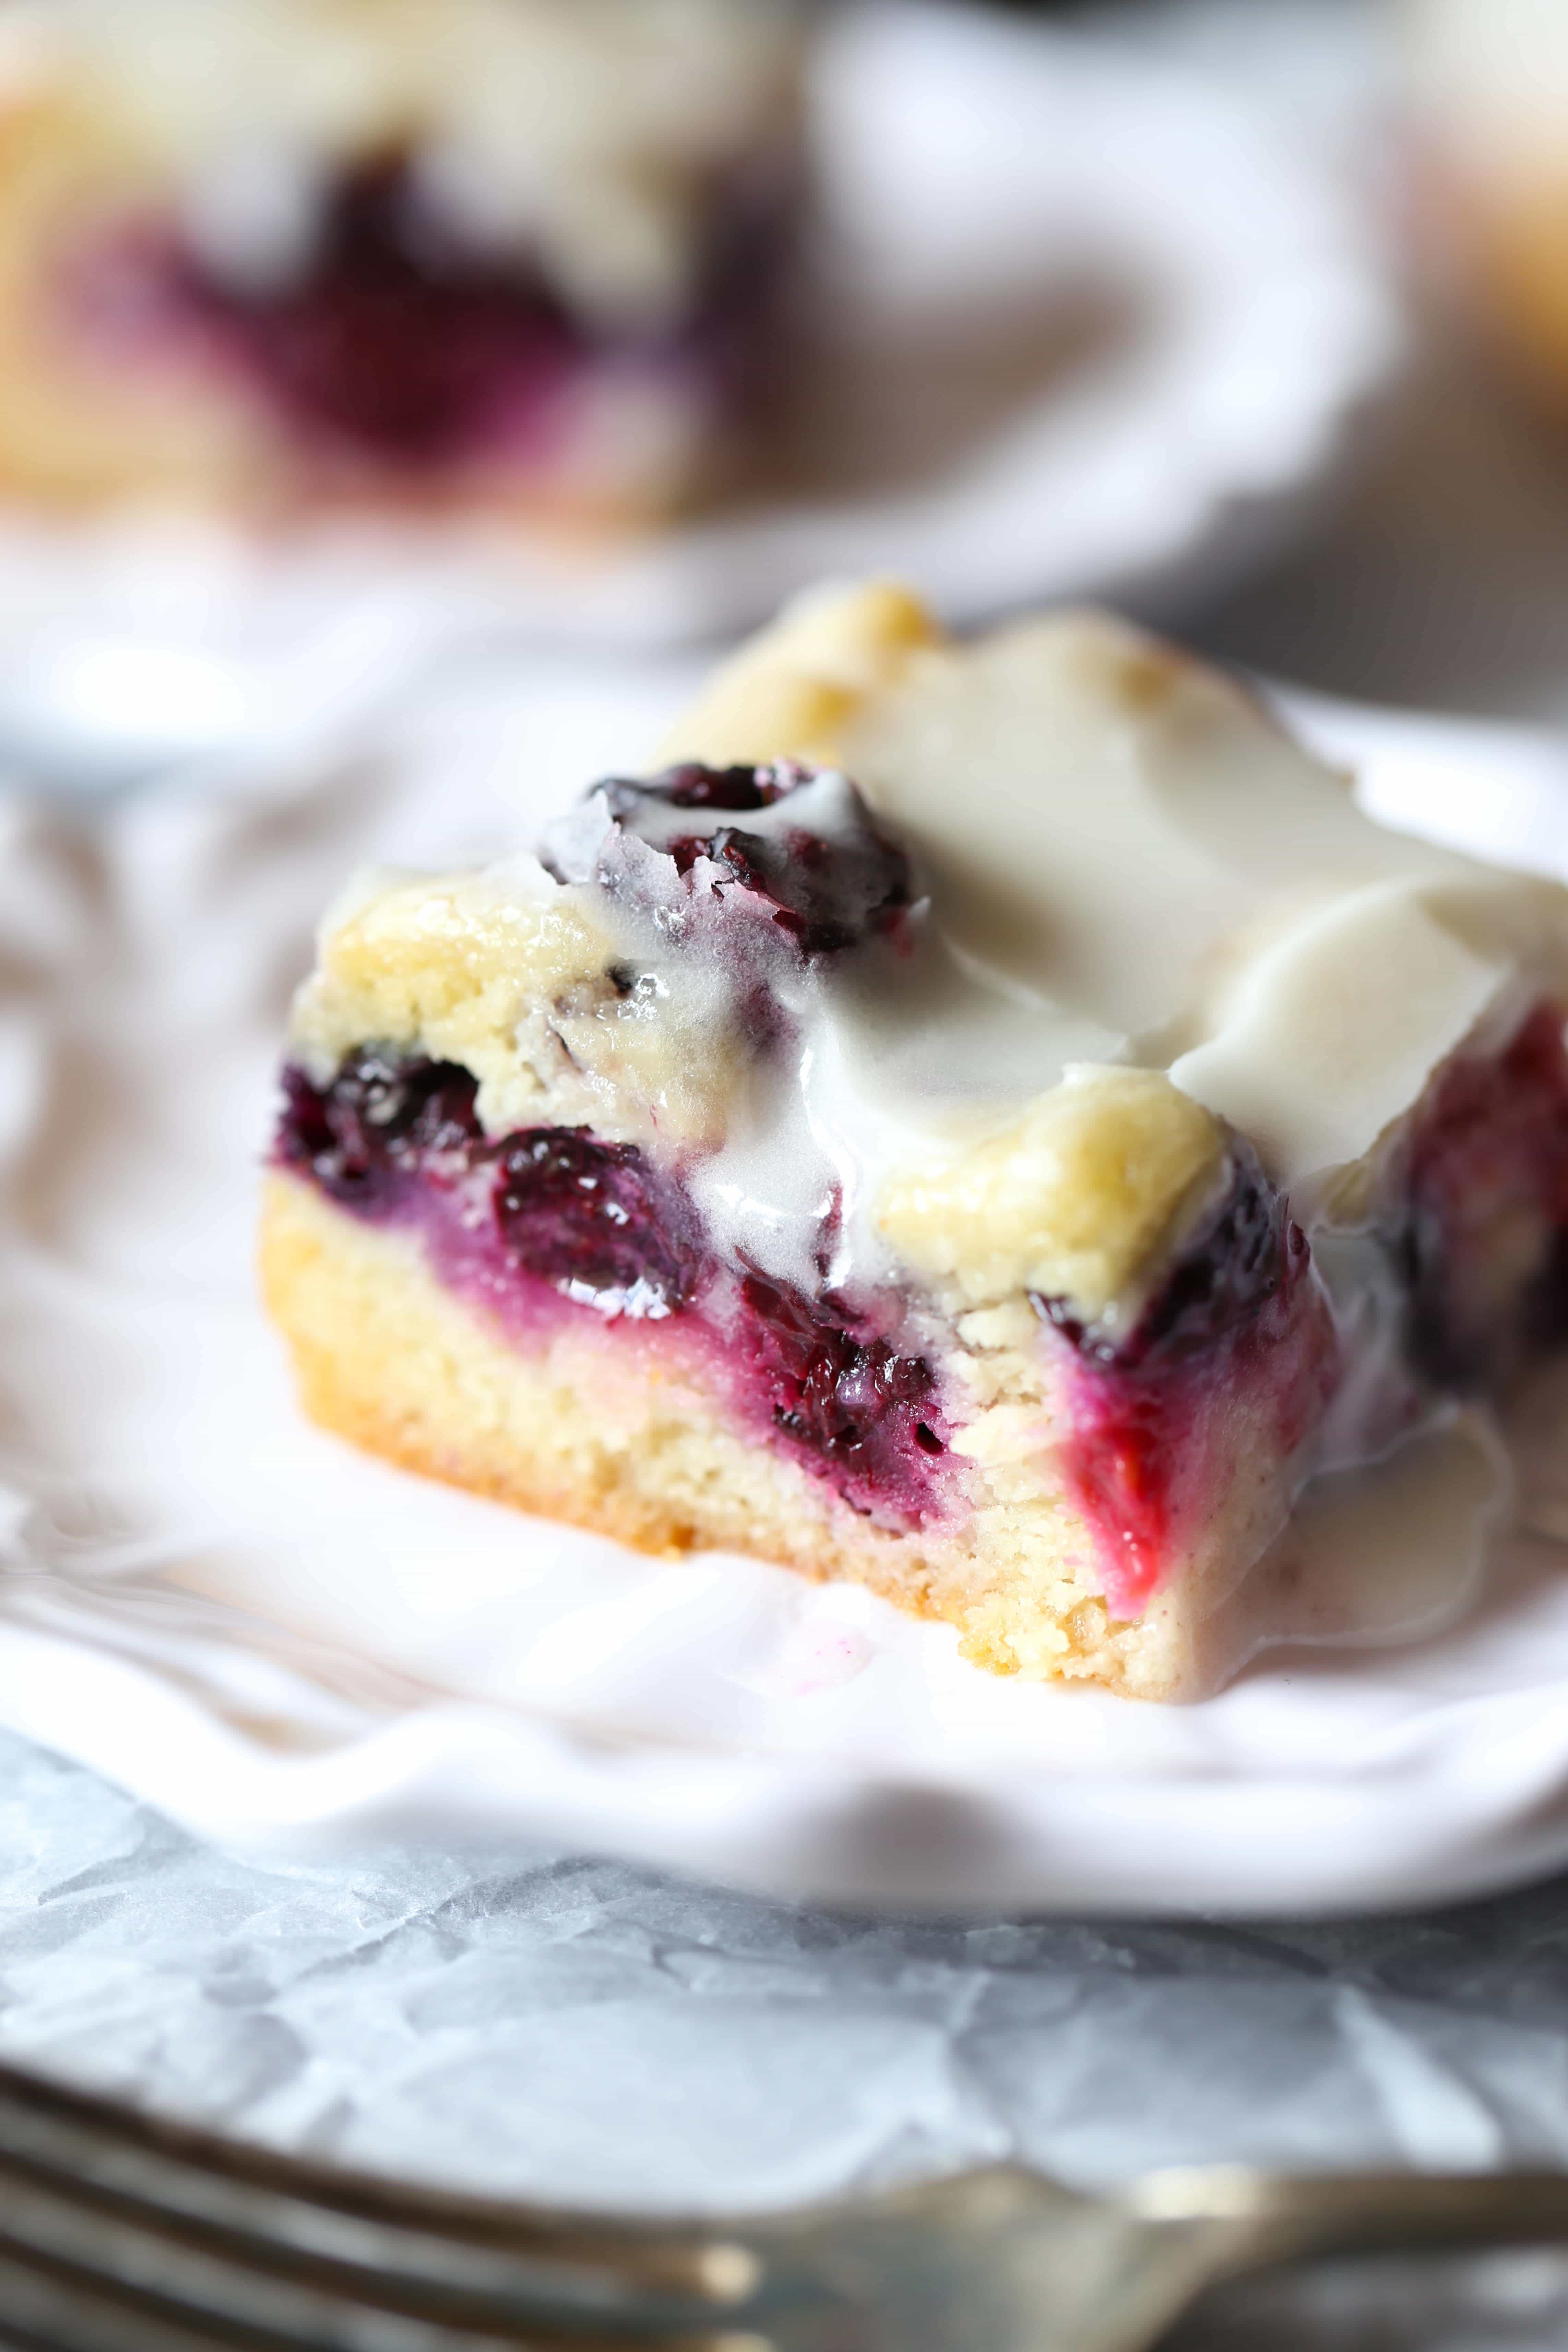 Glazed Berry Sugar Cookie Bars - Cookies and Cups